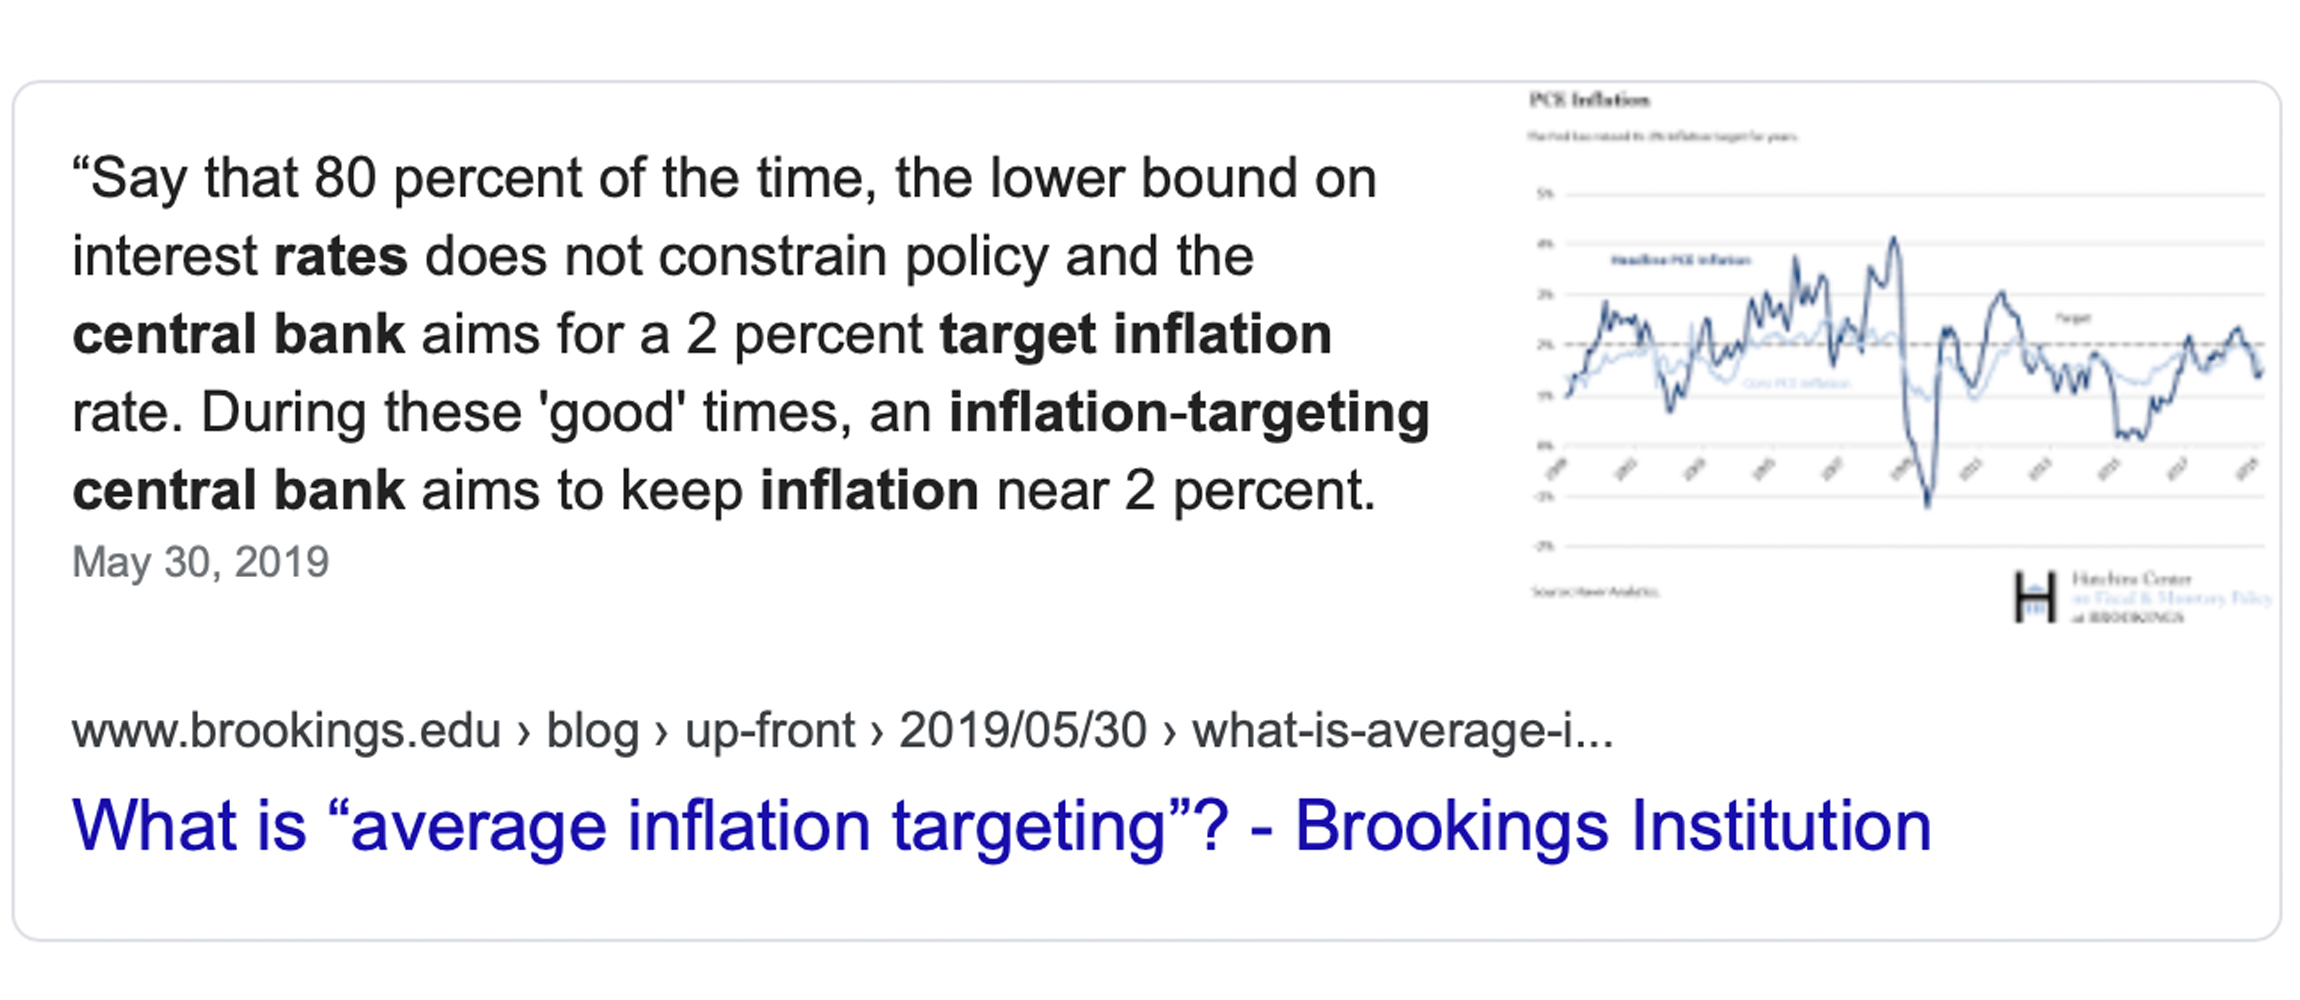 Bitcoin Halving Will Drop Inflation Rate Lower Than Central Banks' 2% Target Reference